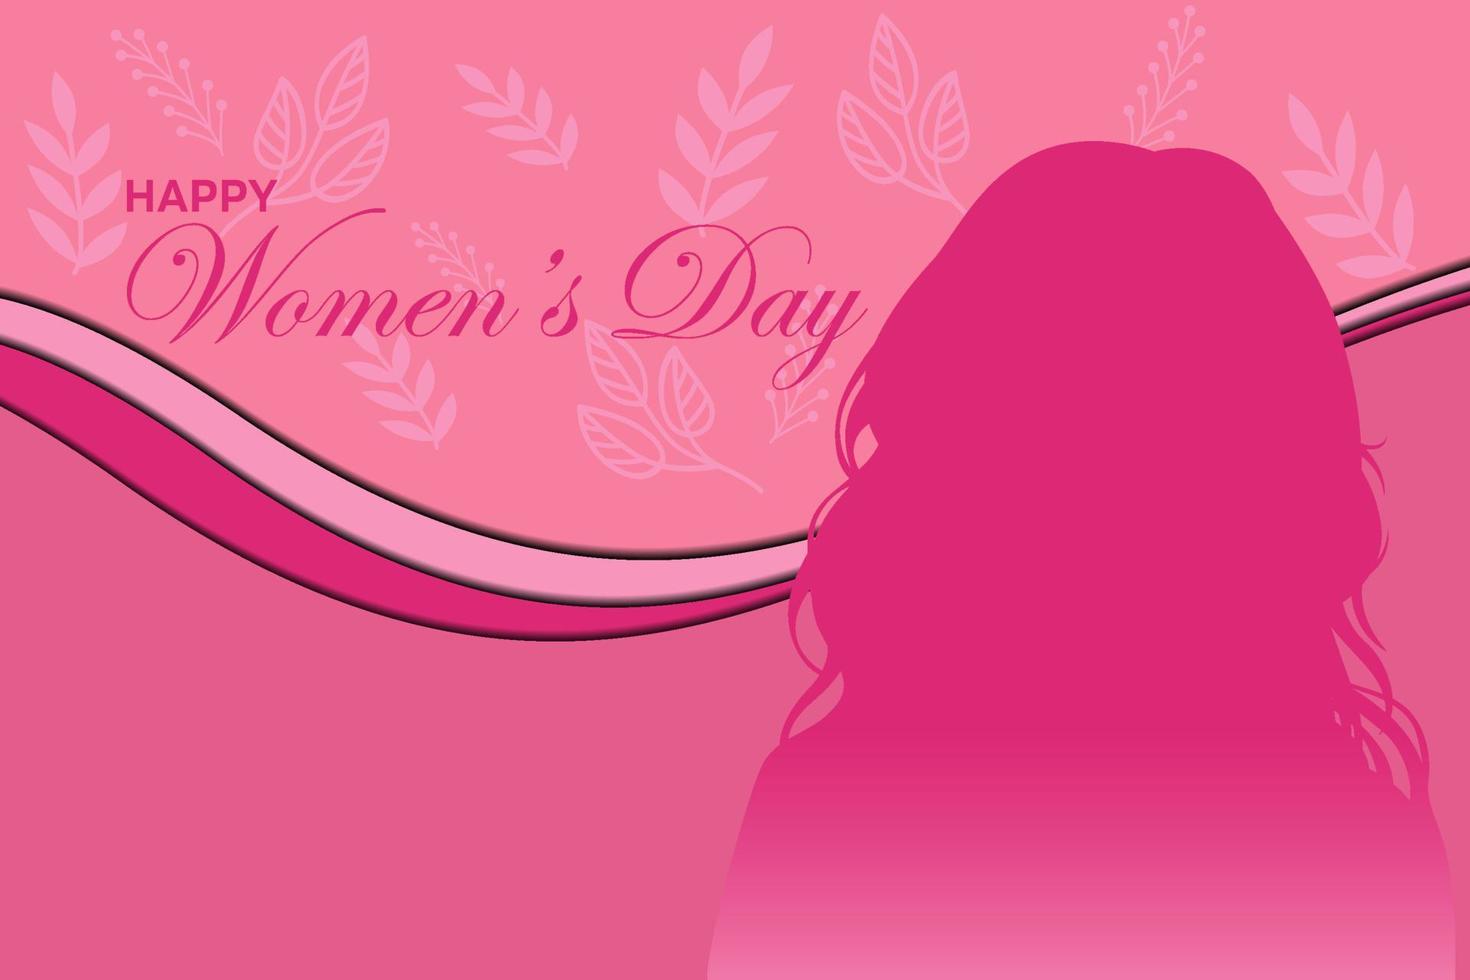 greeting card for happy women's day vector